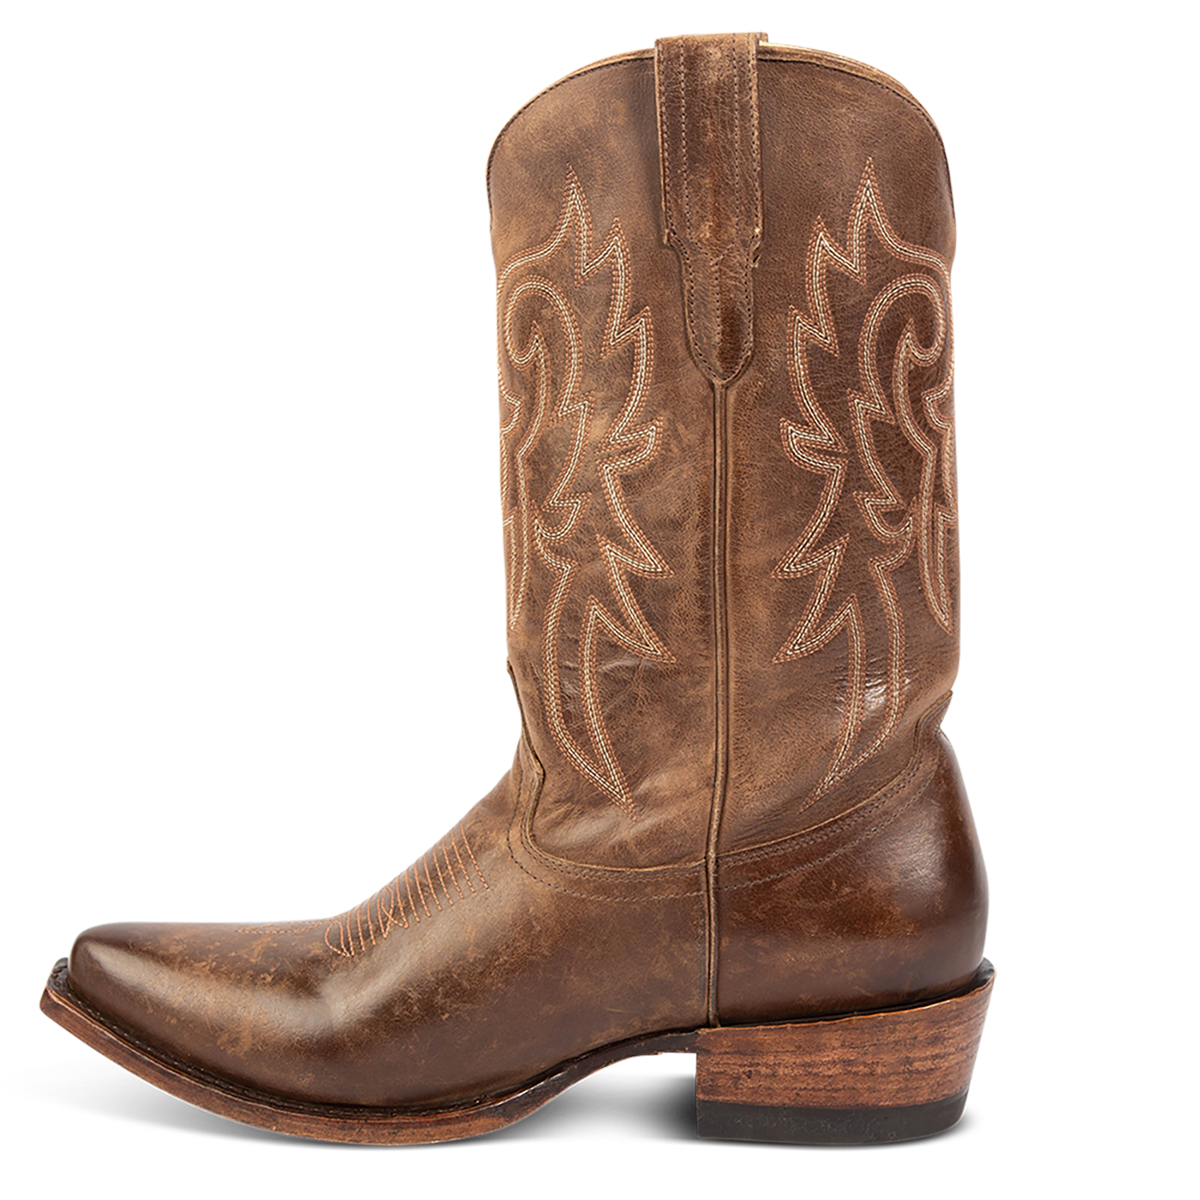 Inside view showing FREEBIRD men's Marshall brown leather western cowboy boot with shaft stitch detailing, snip toe construction and leather pull straps